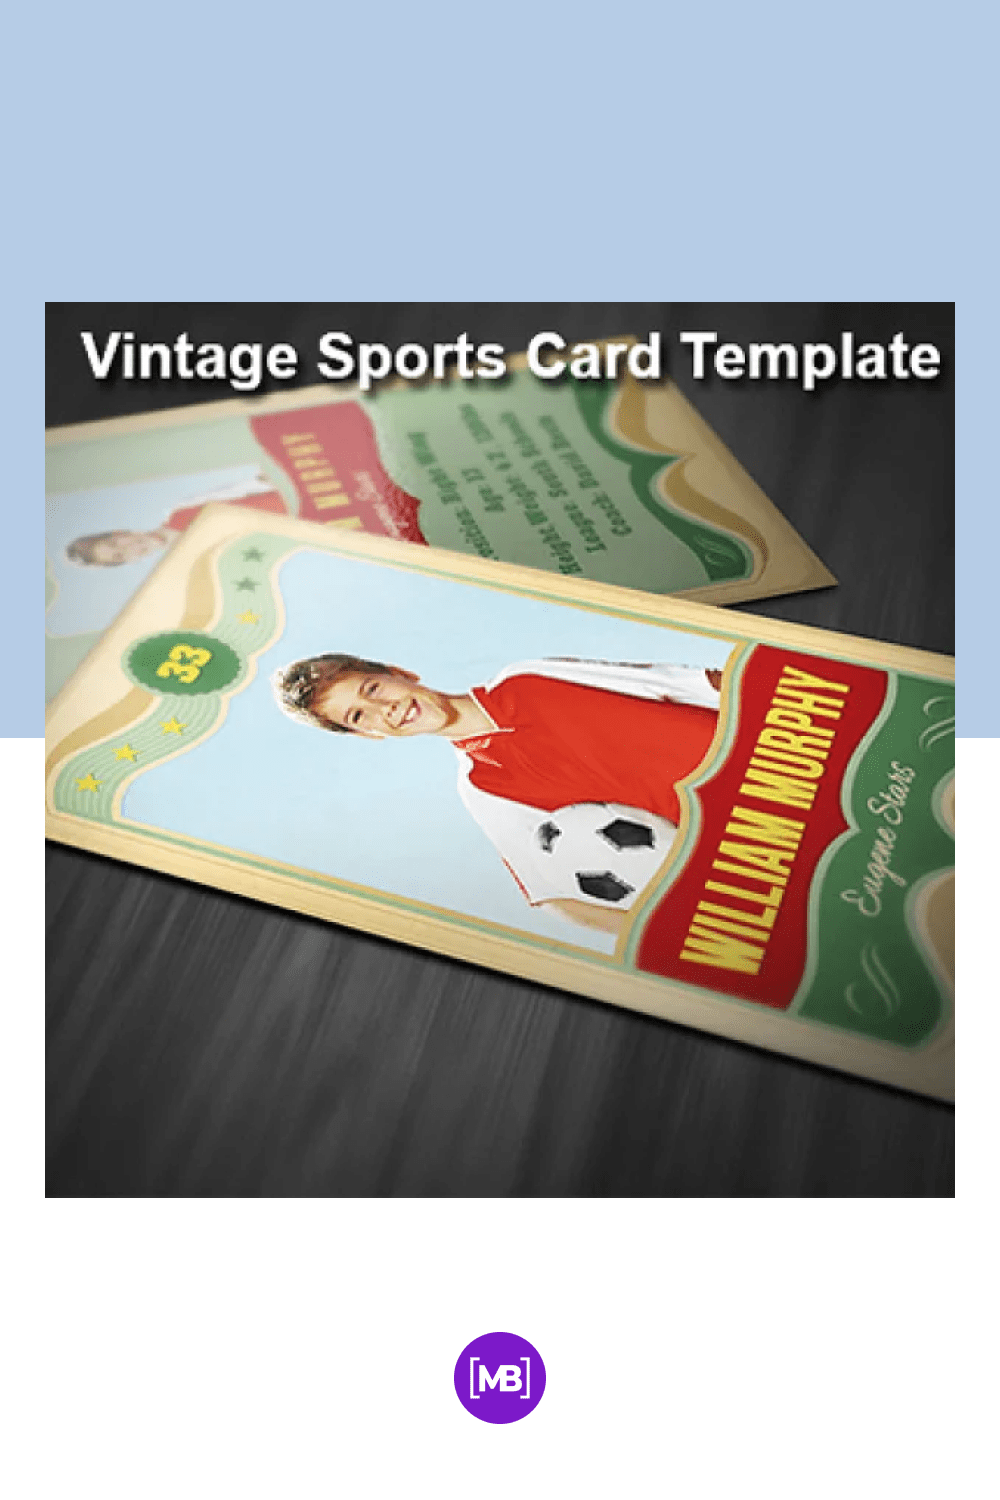 This template is perfect for allowing you to create a stunning sports trading card for your customers.